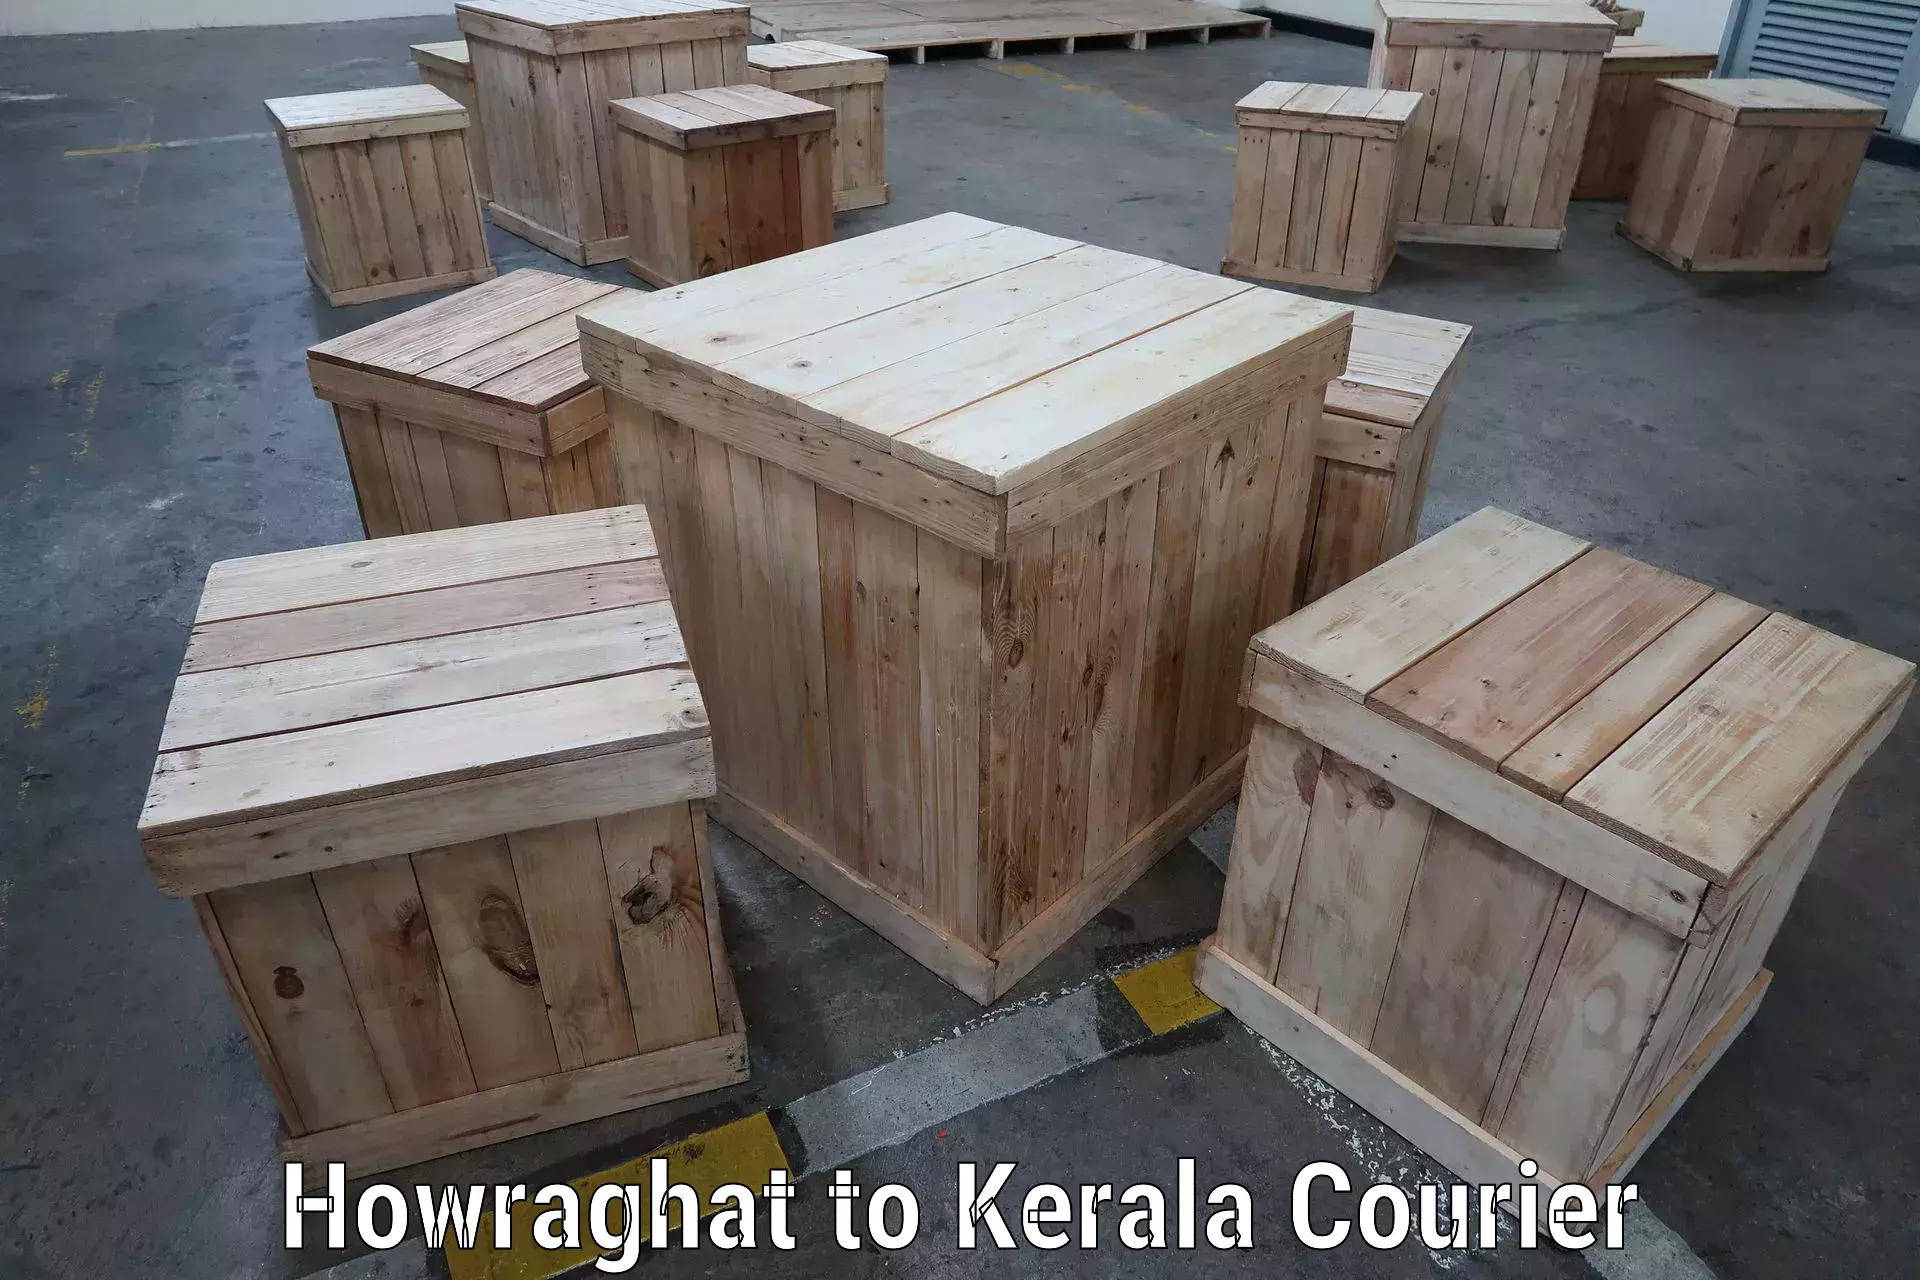 Customer-friendly courier services Howraghat to Cochin Port Kochi